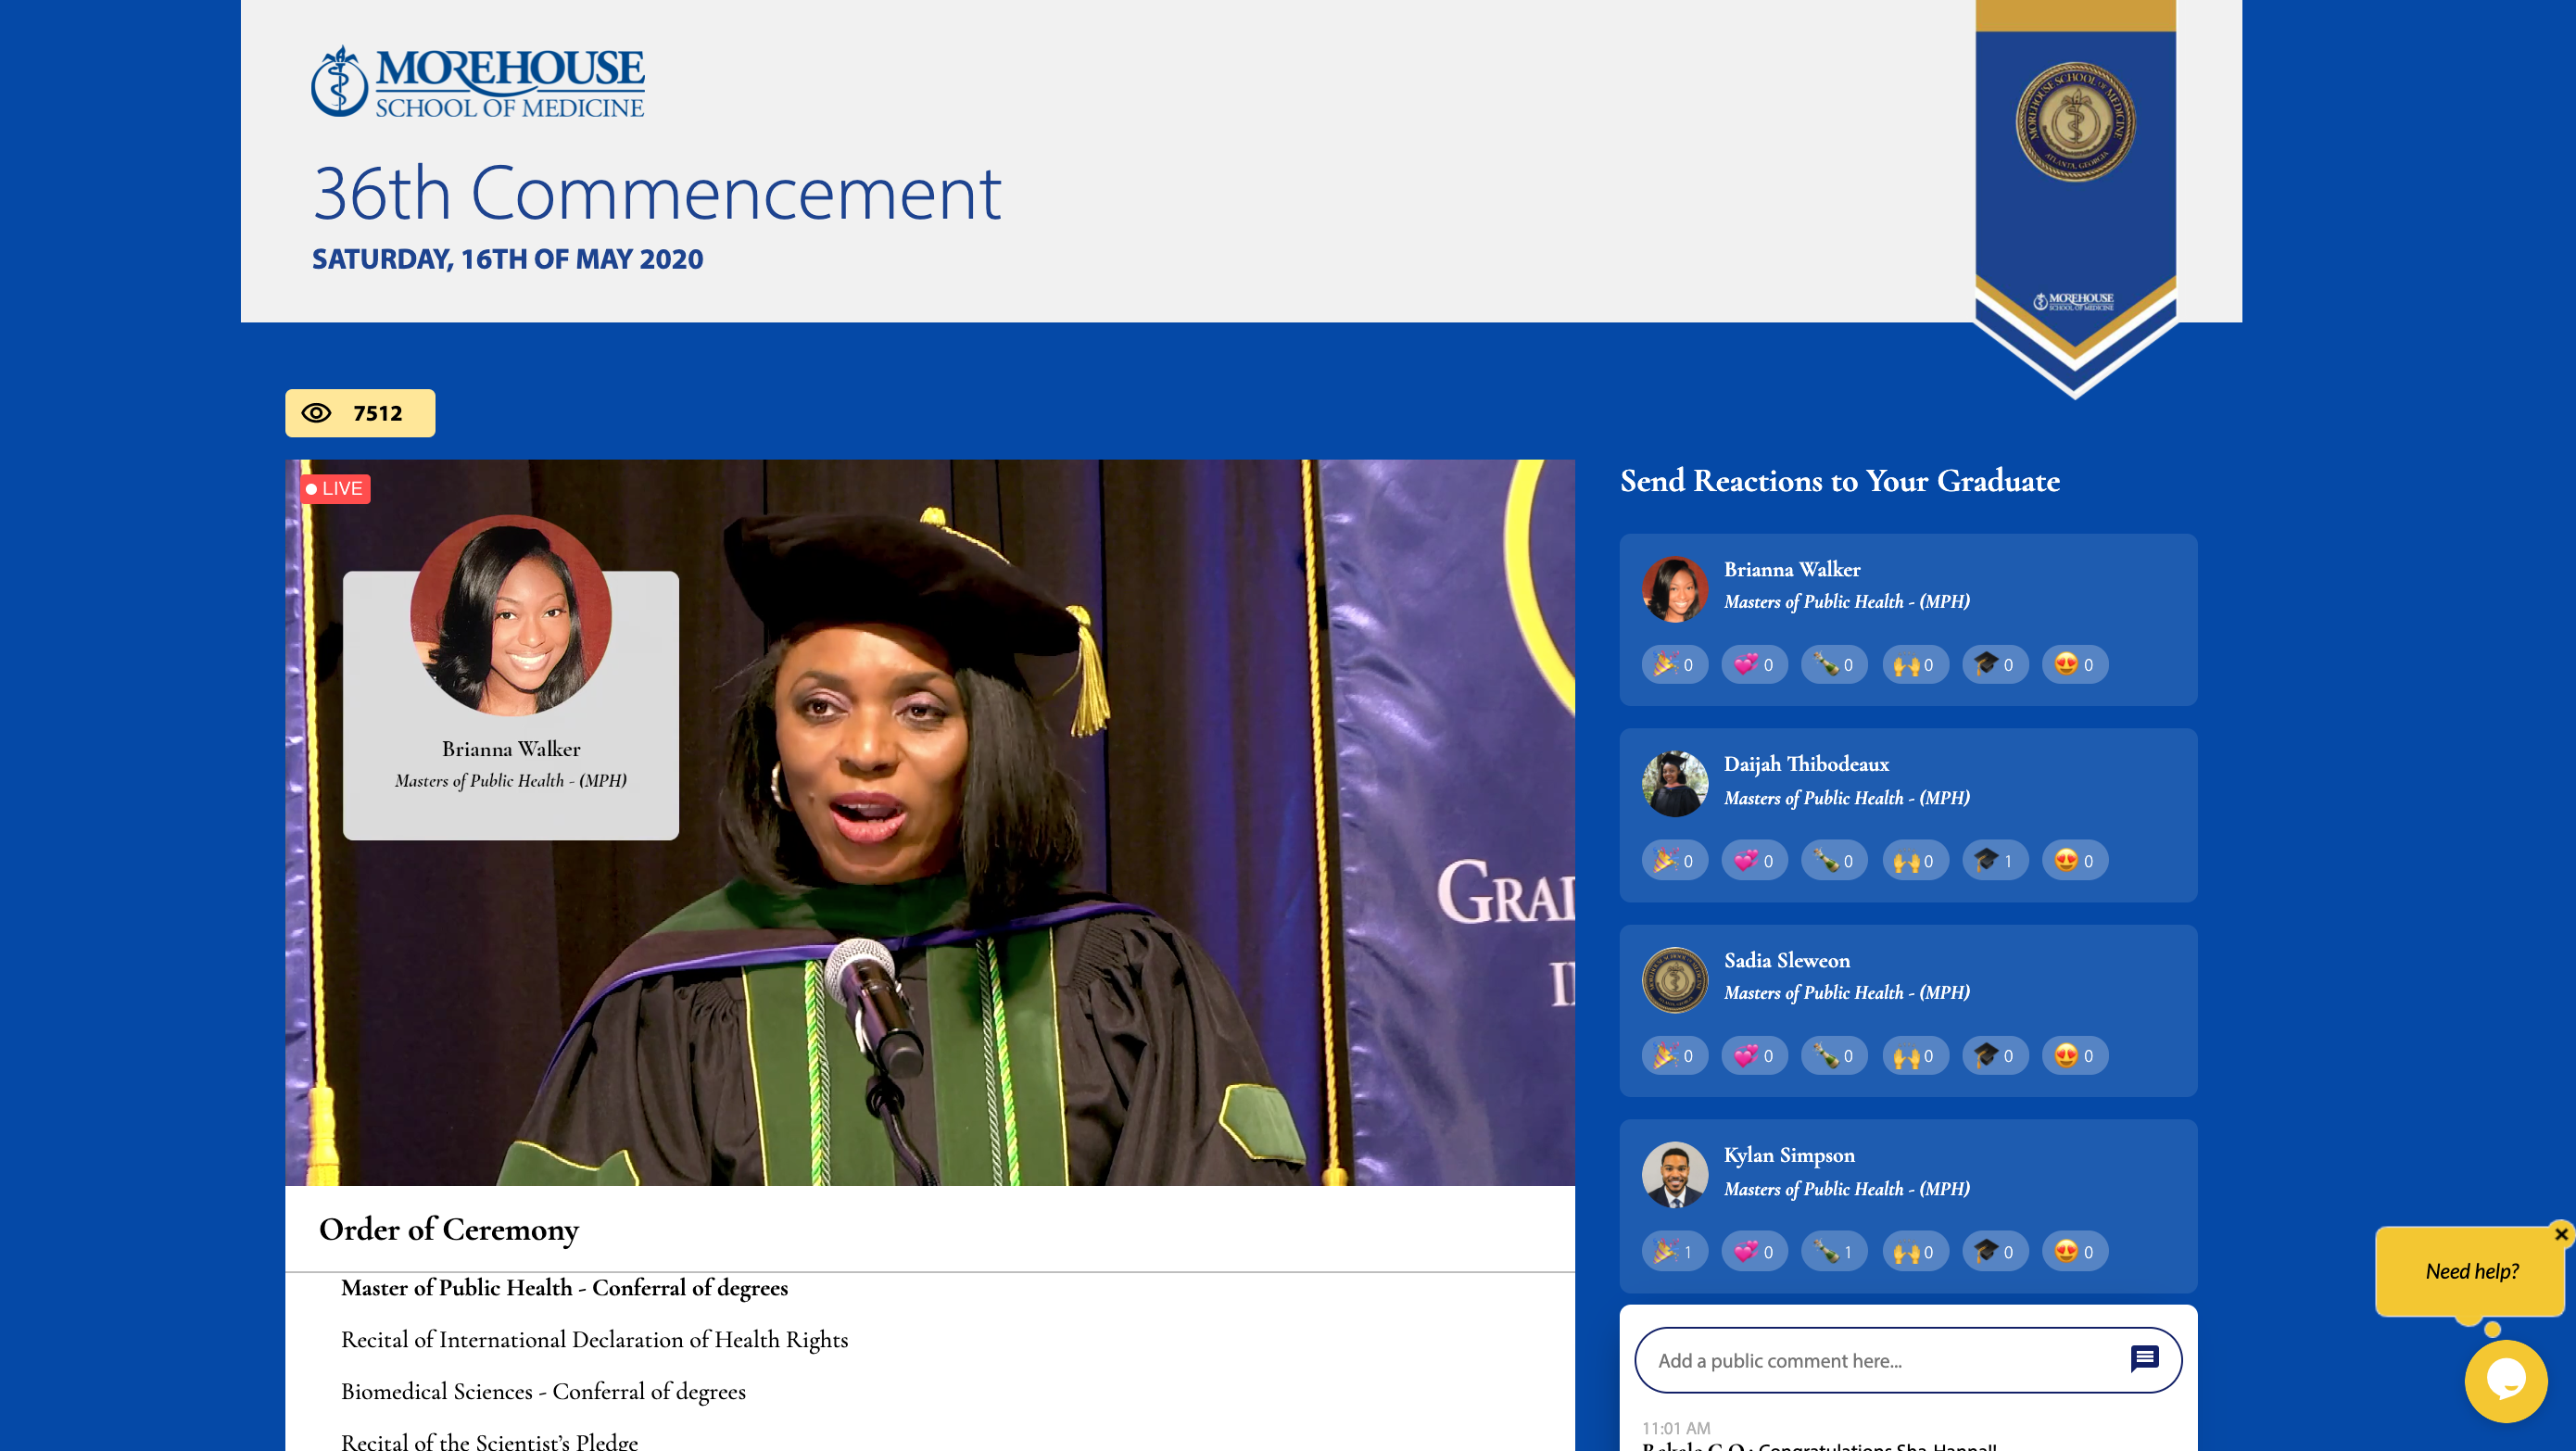 Ngozi F. Anachebe, M.D., Pharm.D., F.A.C.O.G.. Associate Professor, Obstetrics & Gynecology and Associate Dean, Admissions and Student Affairs leads virtual conferral of degrees on Shared Studios platform for Morehouse School of Medicine's 36th Commencement Exercises on May 16, 2020.